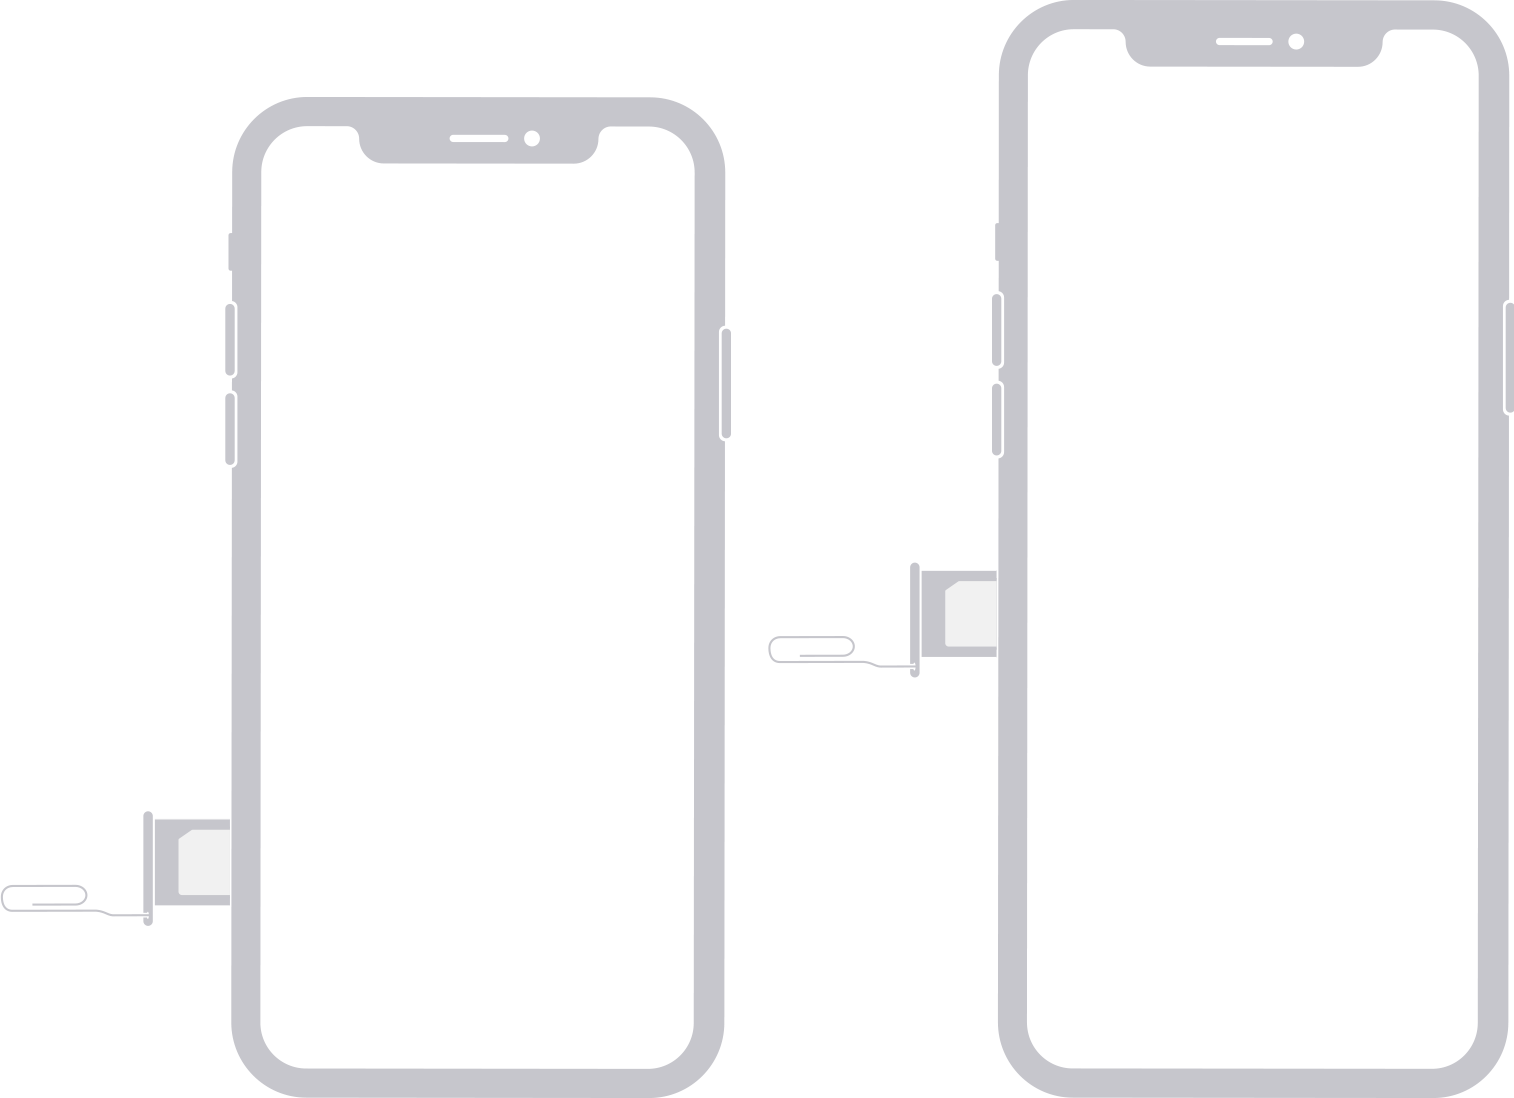 Image shows SIM on the left-hand side of iPhone